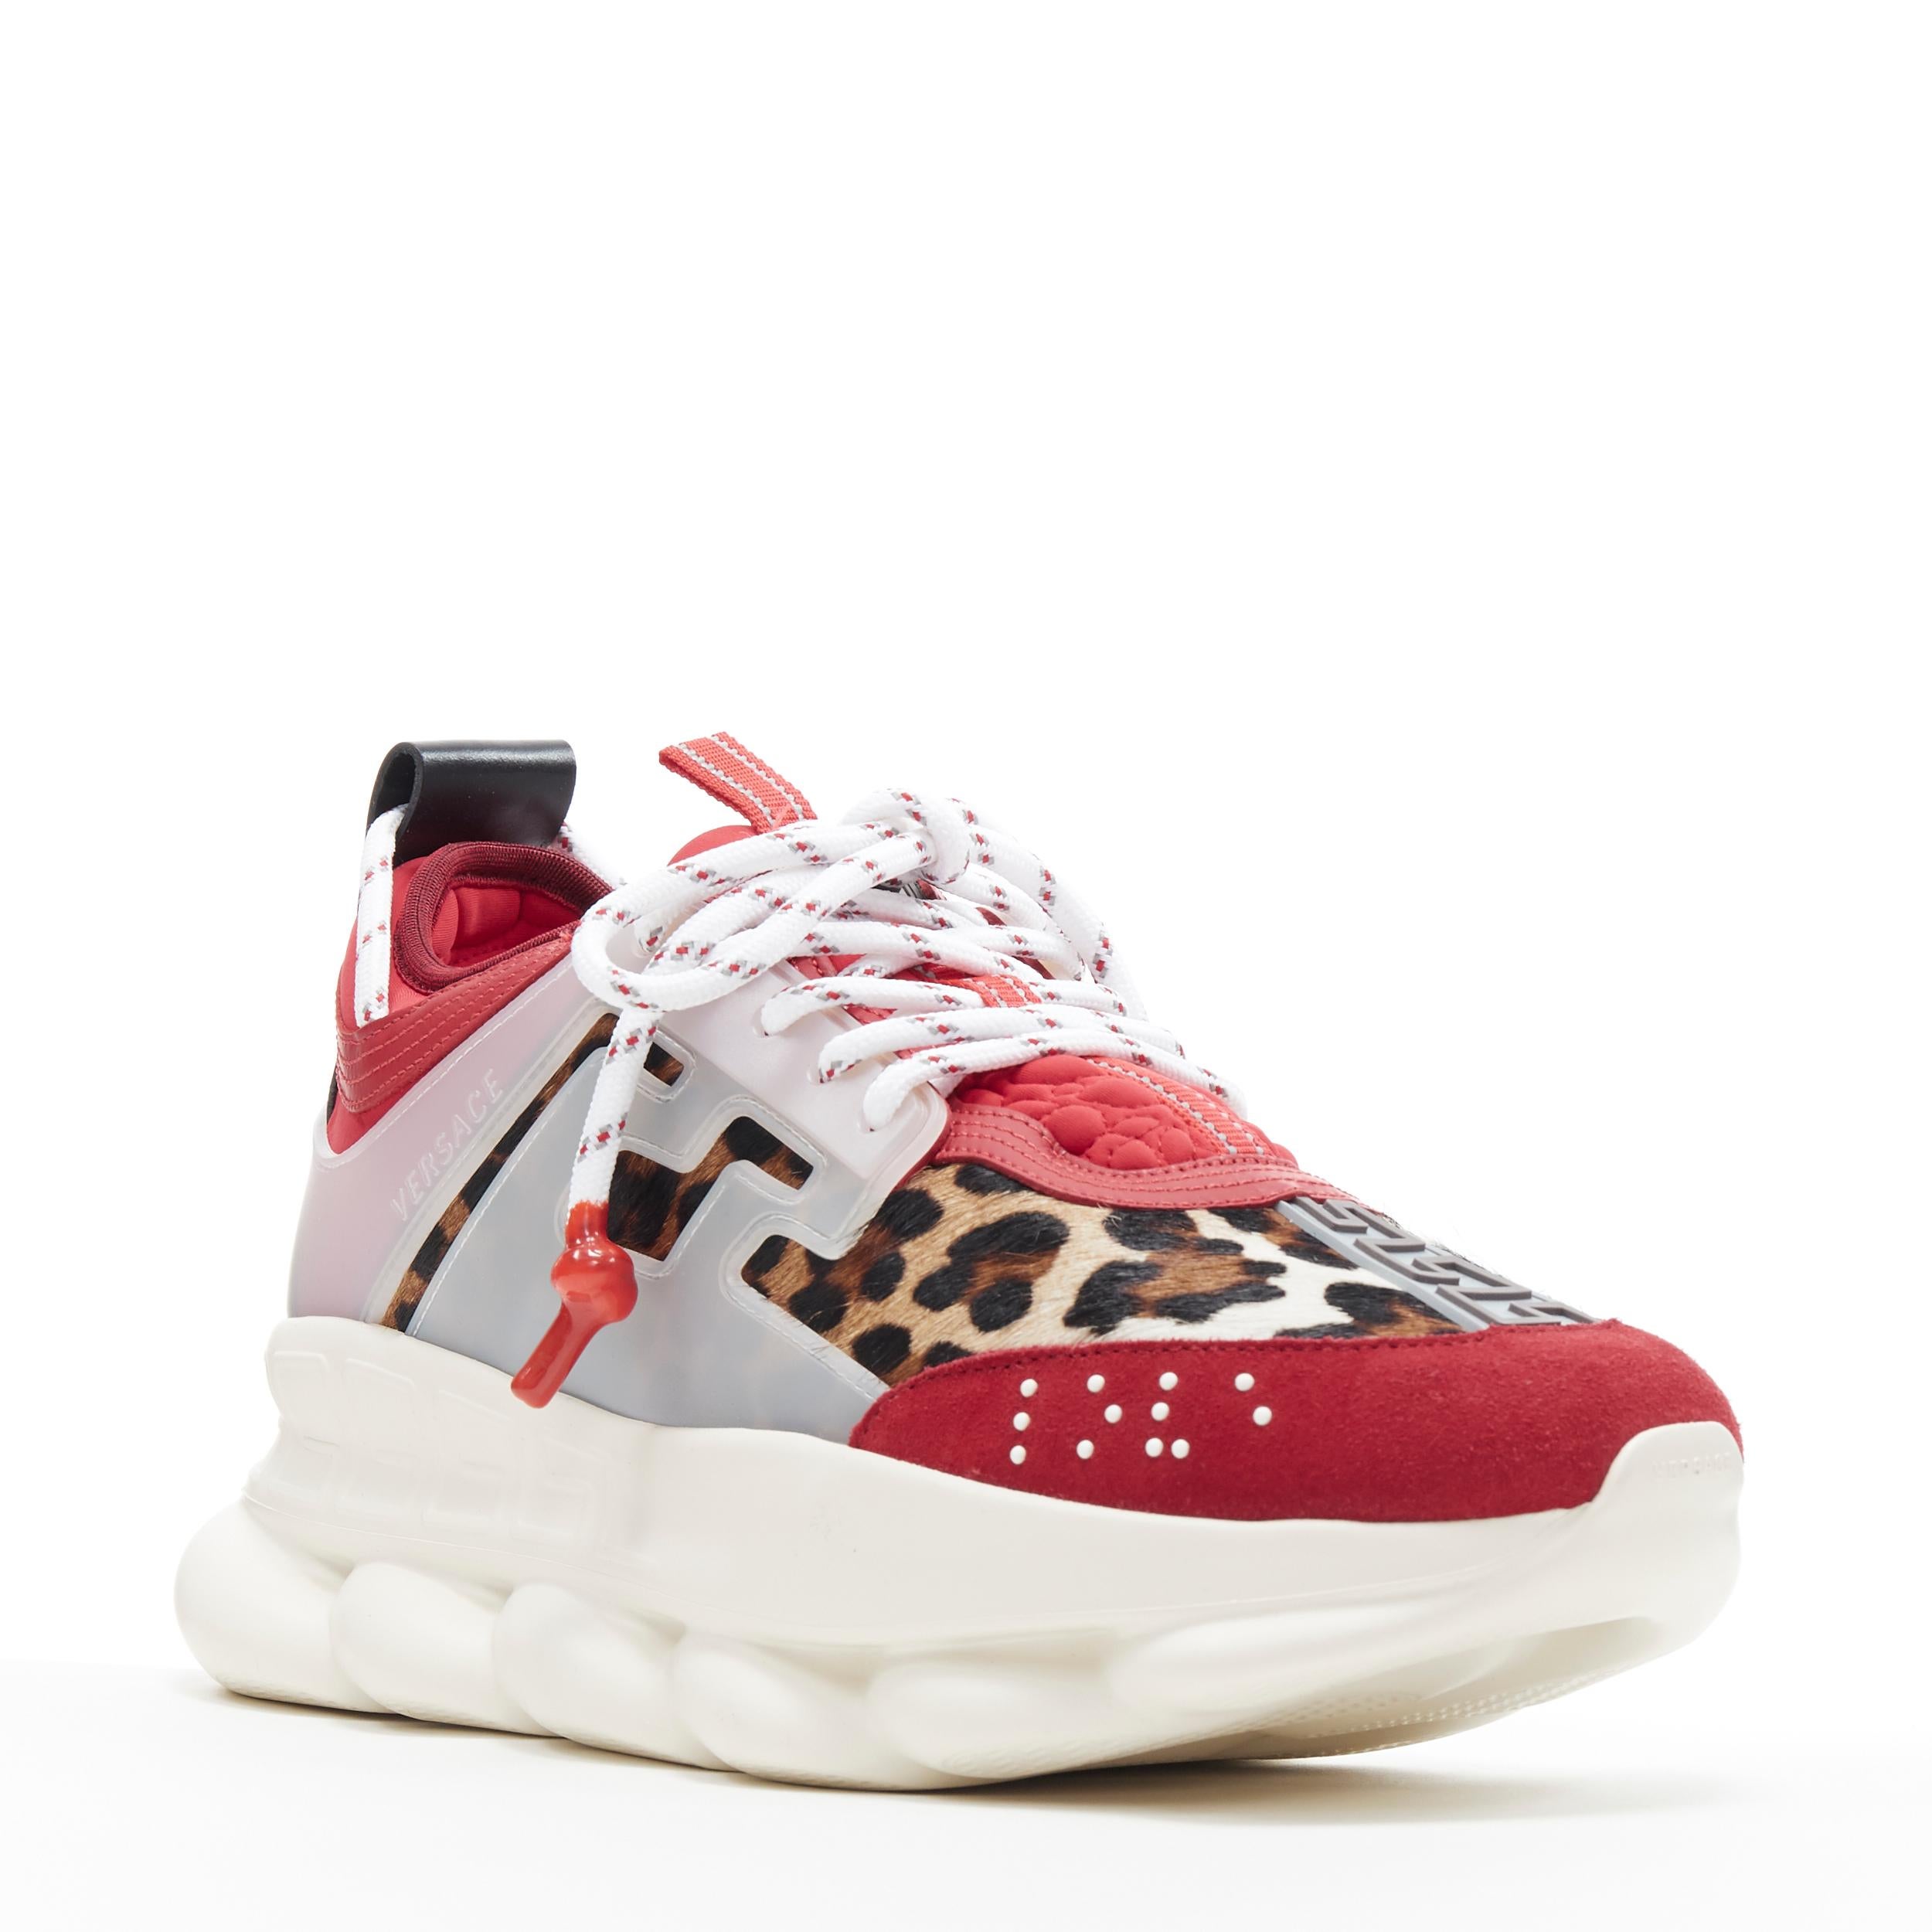 new VERSACE Chain Reaction Red Wild Leopard low chunky sneaker EU39.5 US6.5 
Reference: TGAS/B00198 
Brand: Versace 
Designer: Salehe Bembury 
Model: Chain Reaction Red Leopard 
Material: Leather 
Color: Red 
Pattern: Leopard 
Closure: Lace up